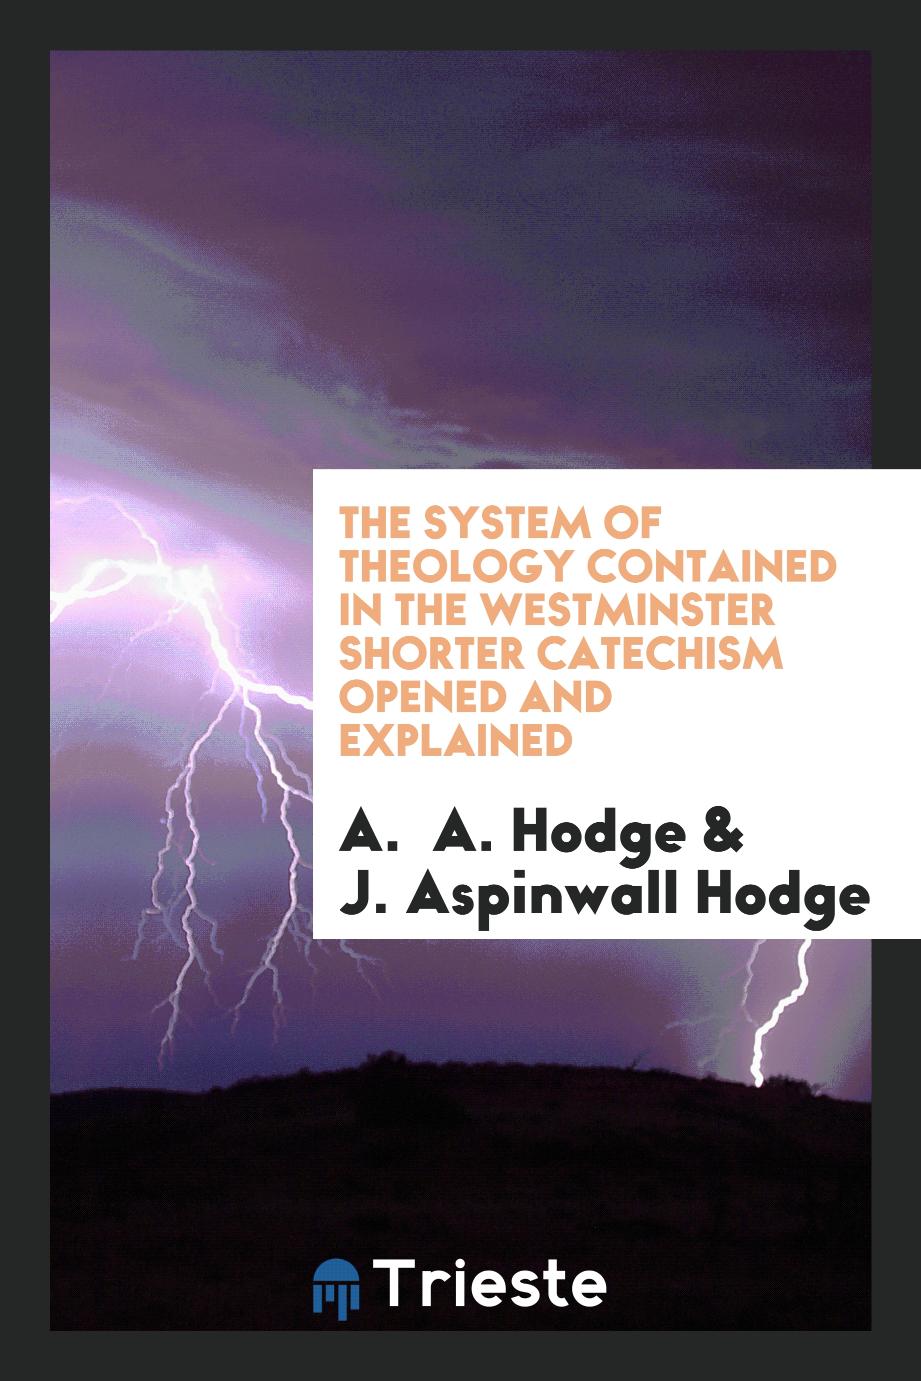 The system of theology contained in the Westminster shorter catechism opened and explained